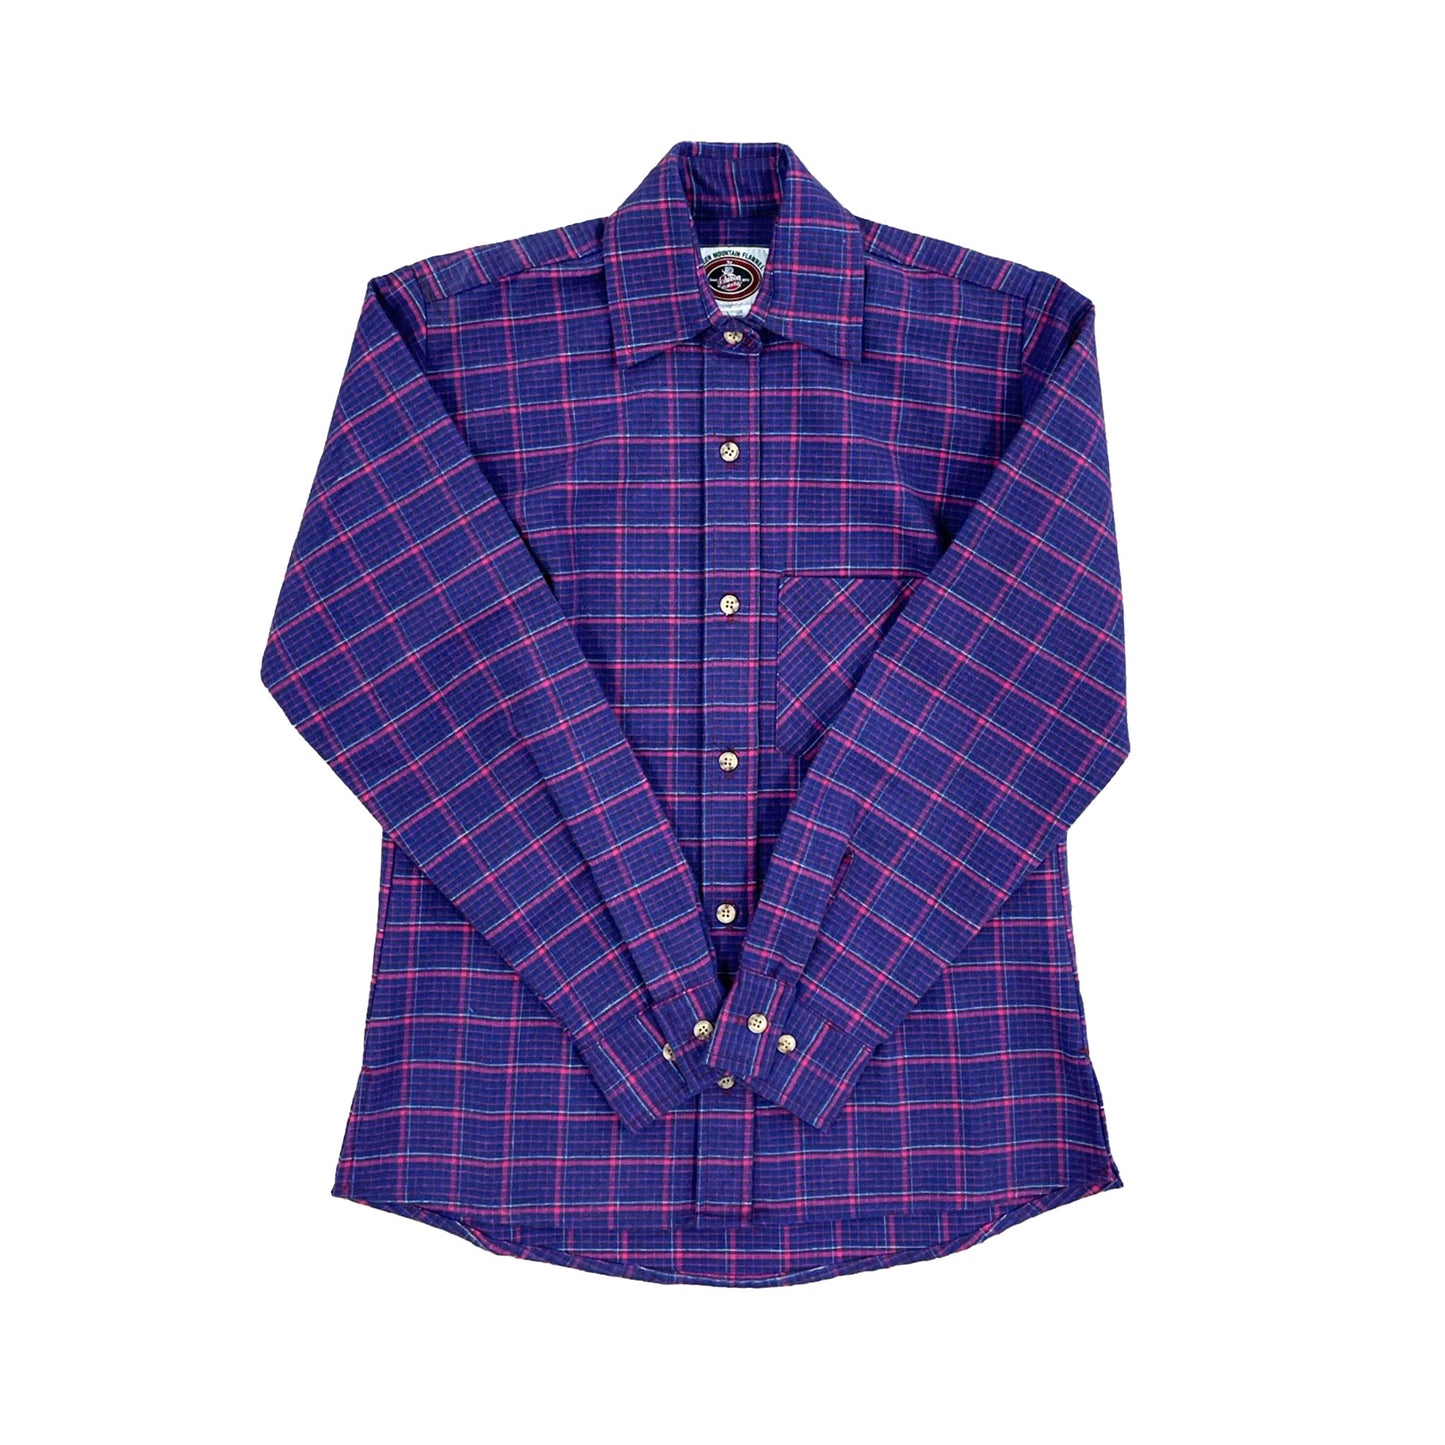 Women's flannel purple and pink plaid button down shirt